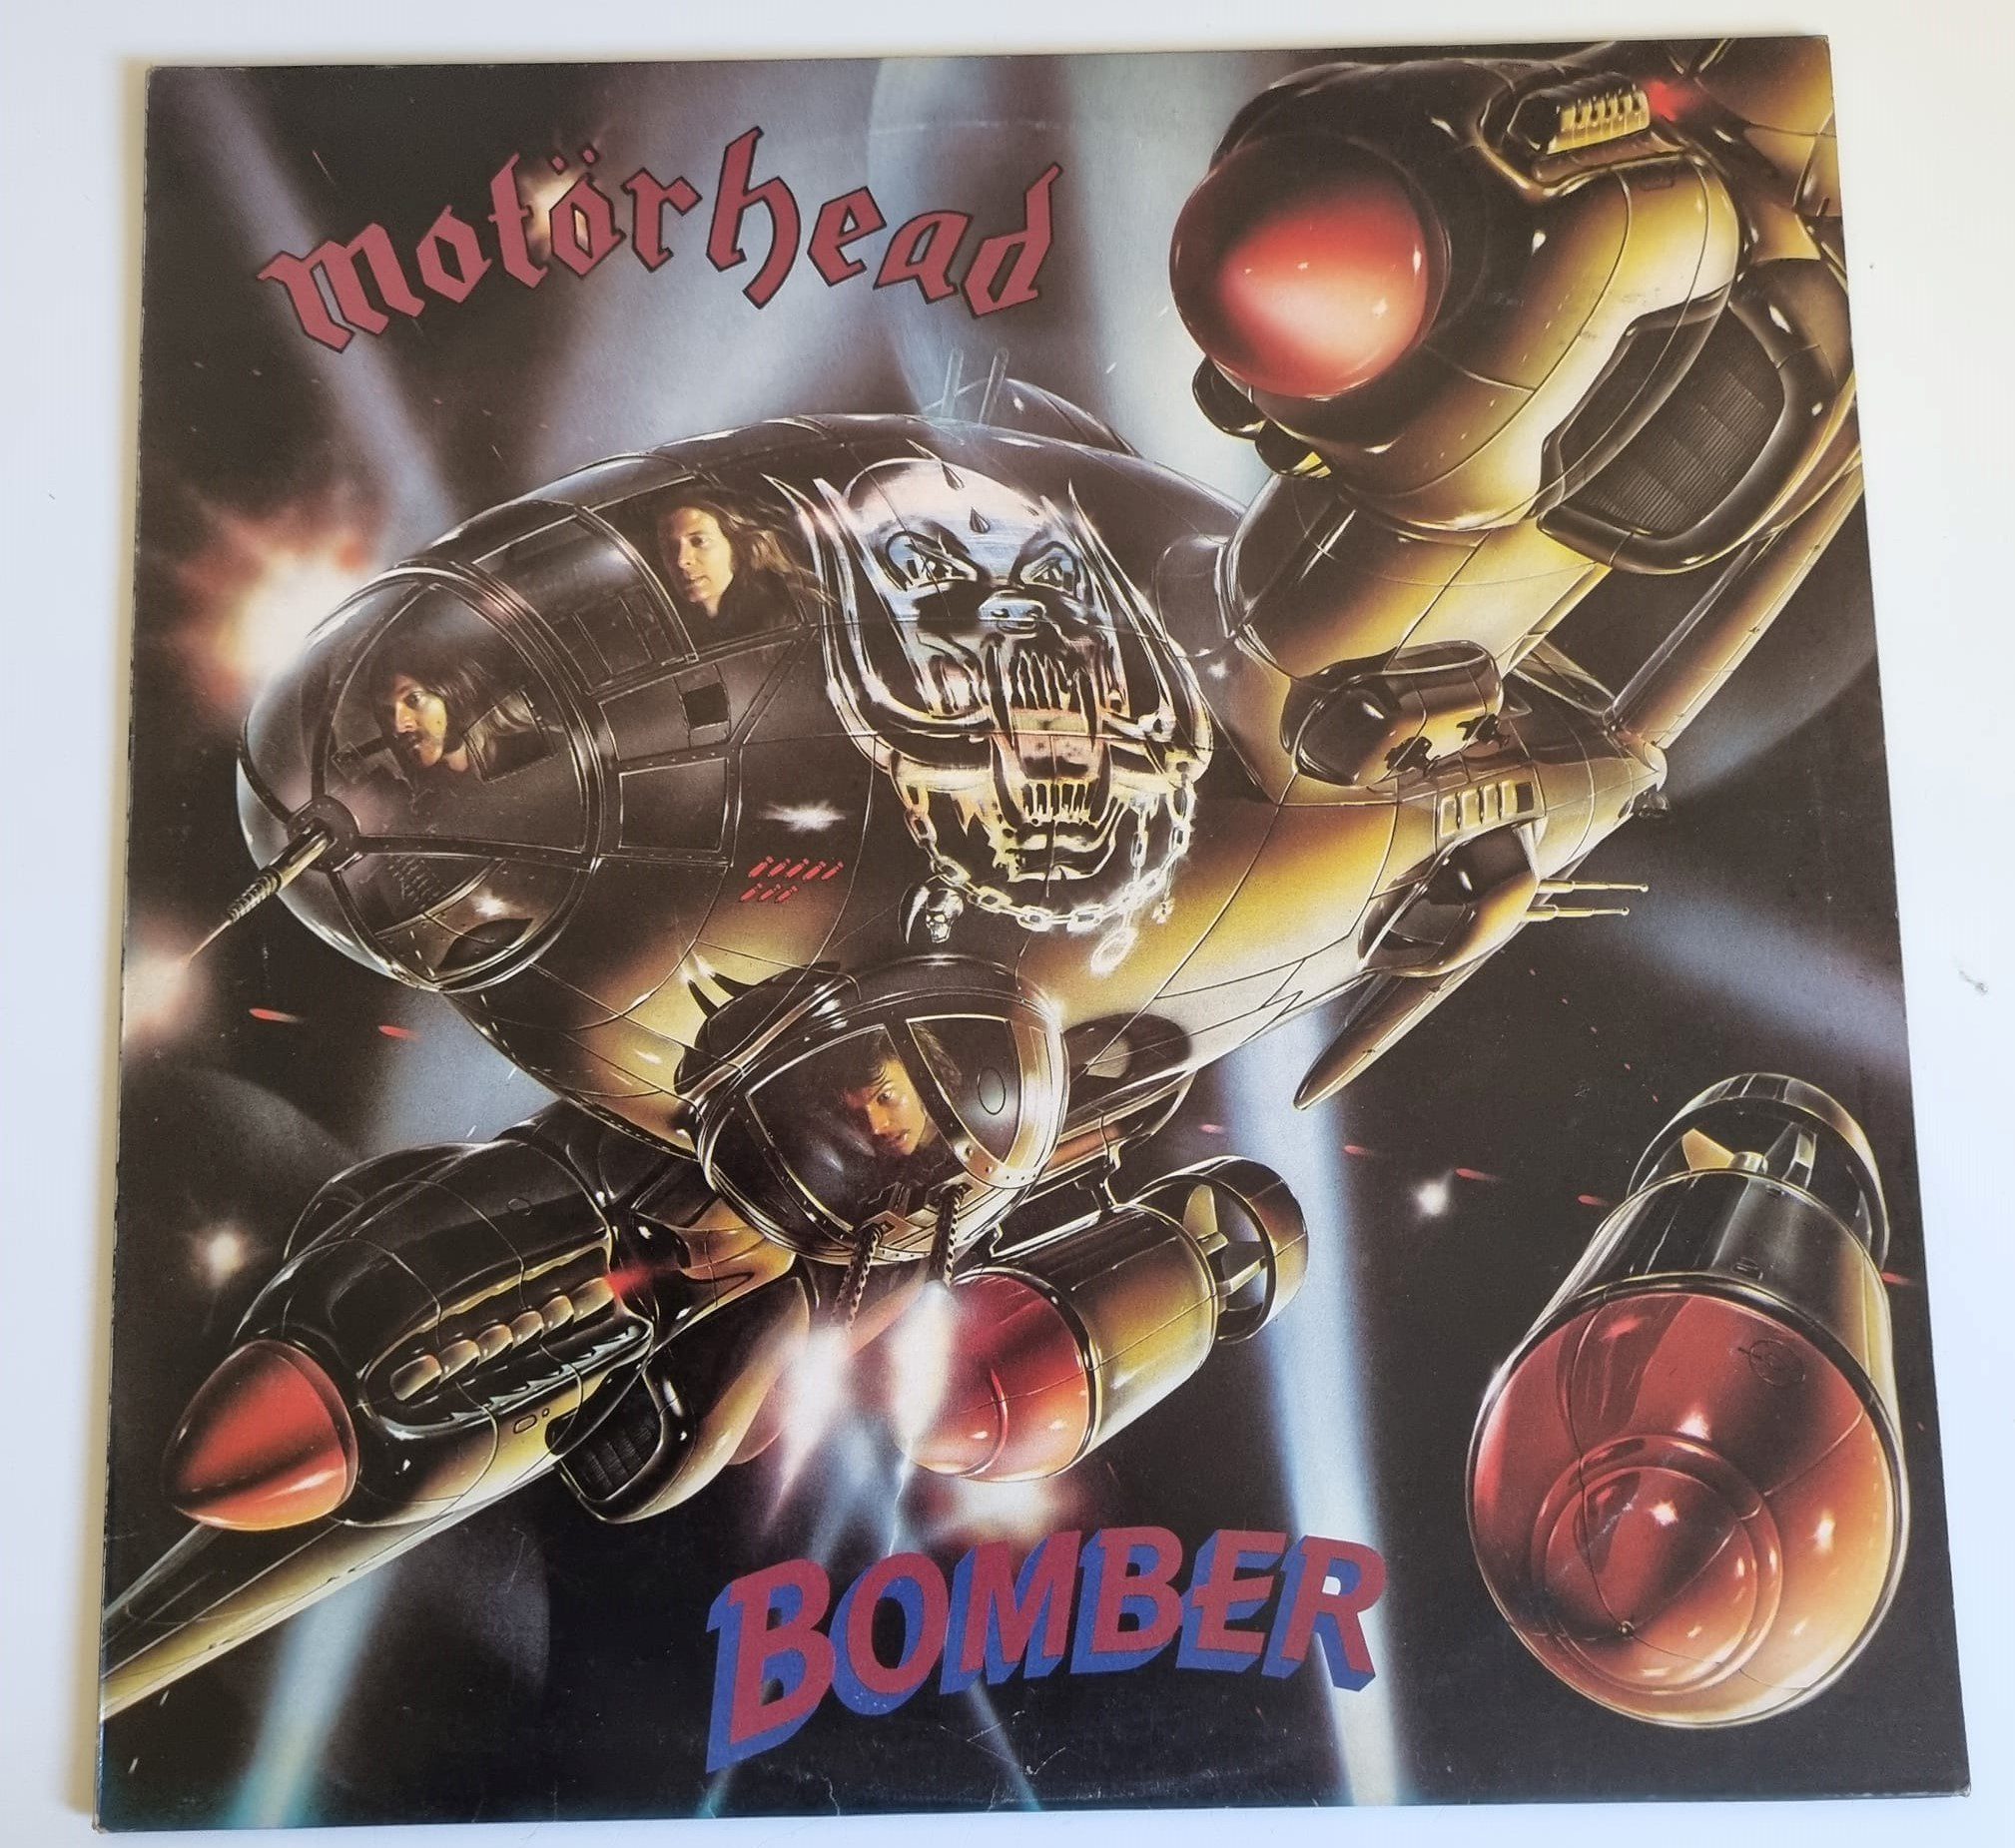 Buy this rare Motorhead record by clicking here